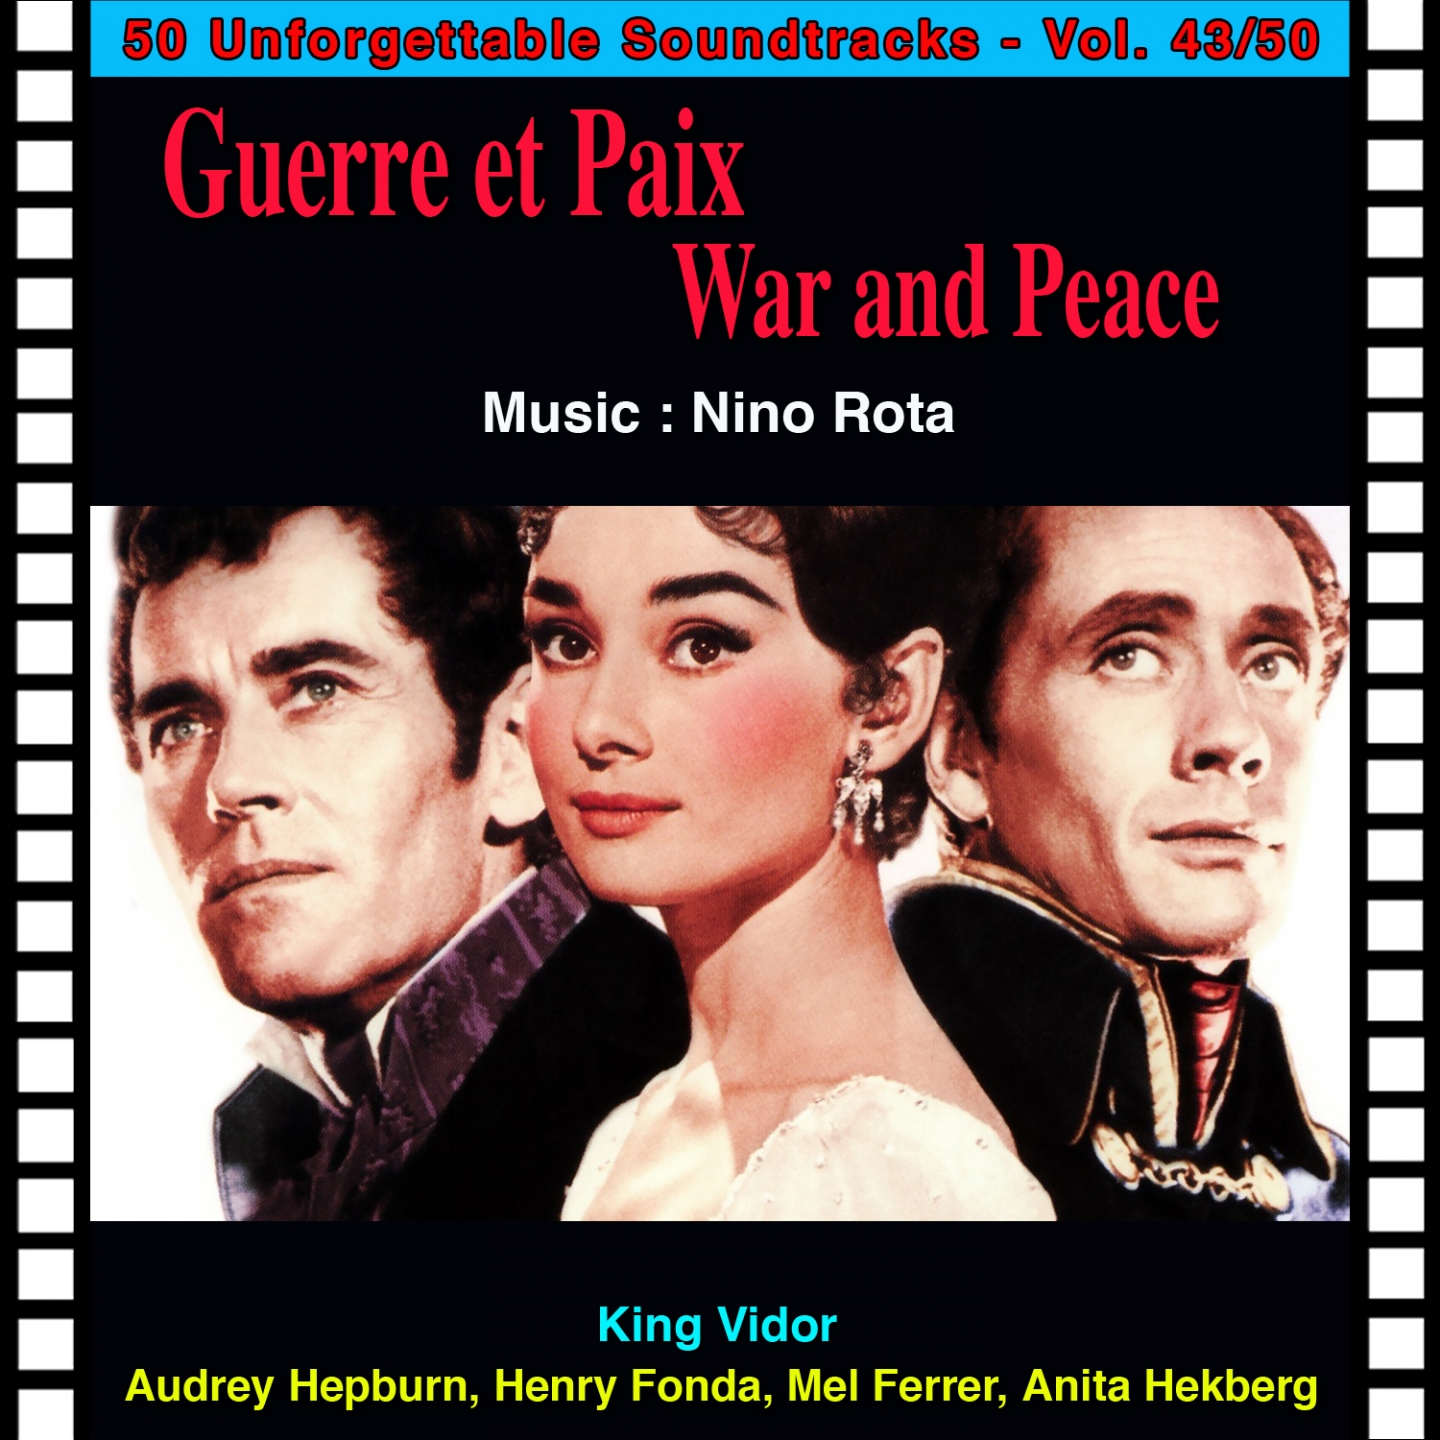 Prelude (Main Title) (Guerre Et Paix - War and Peace)